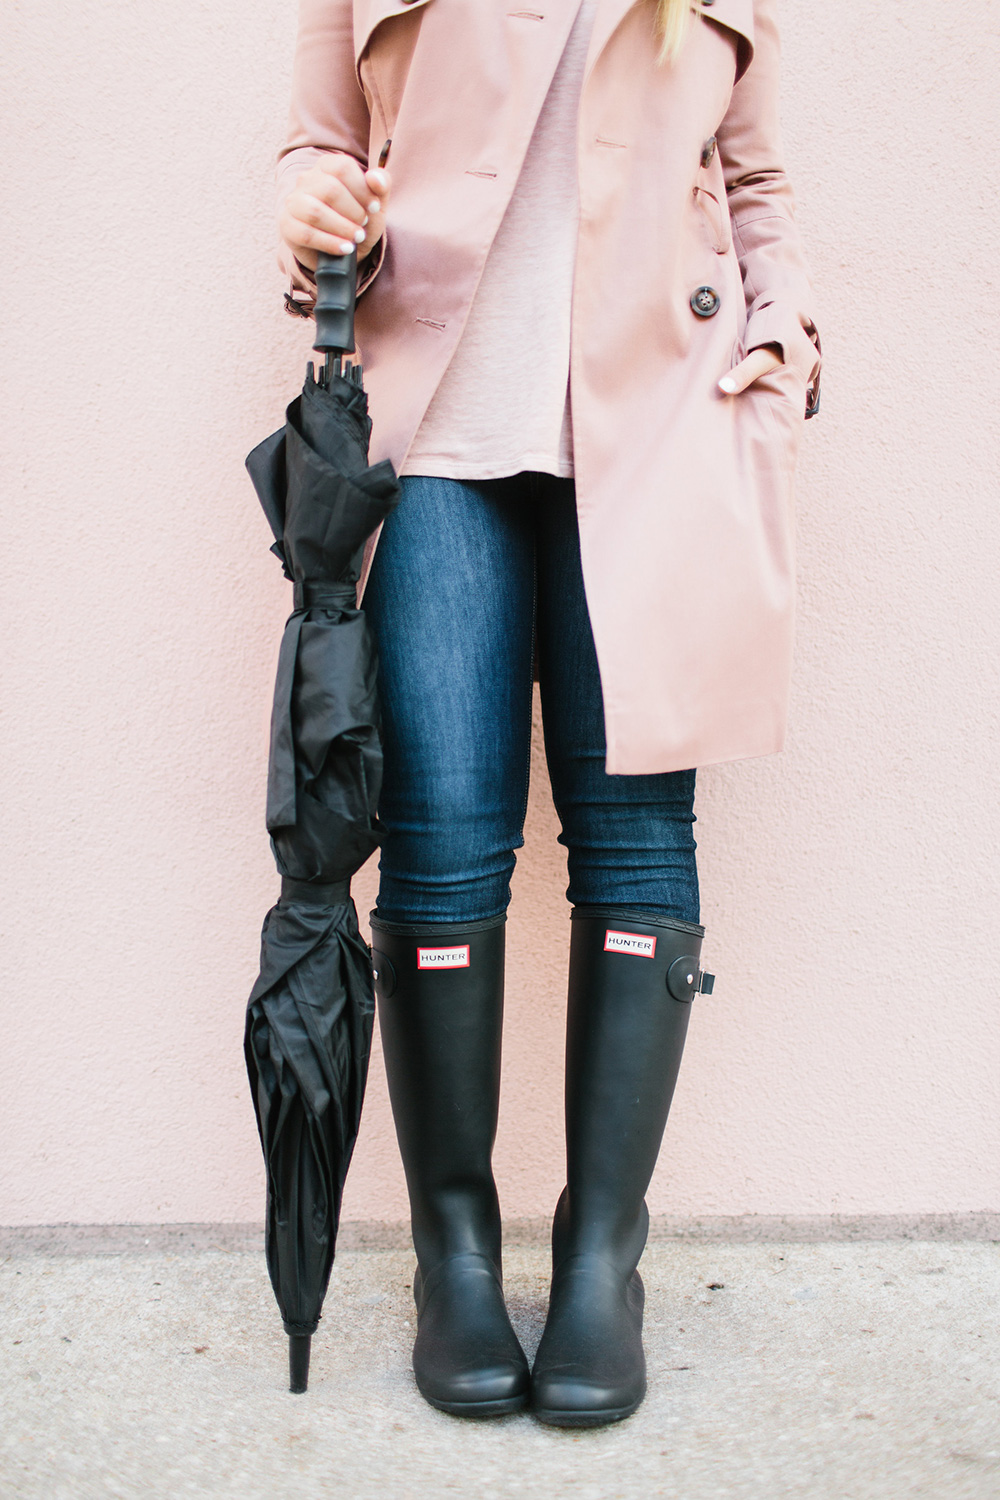 Dusty Rose Pink Trench Coat